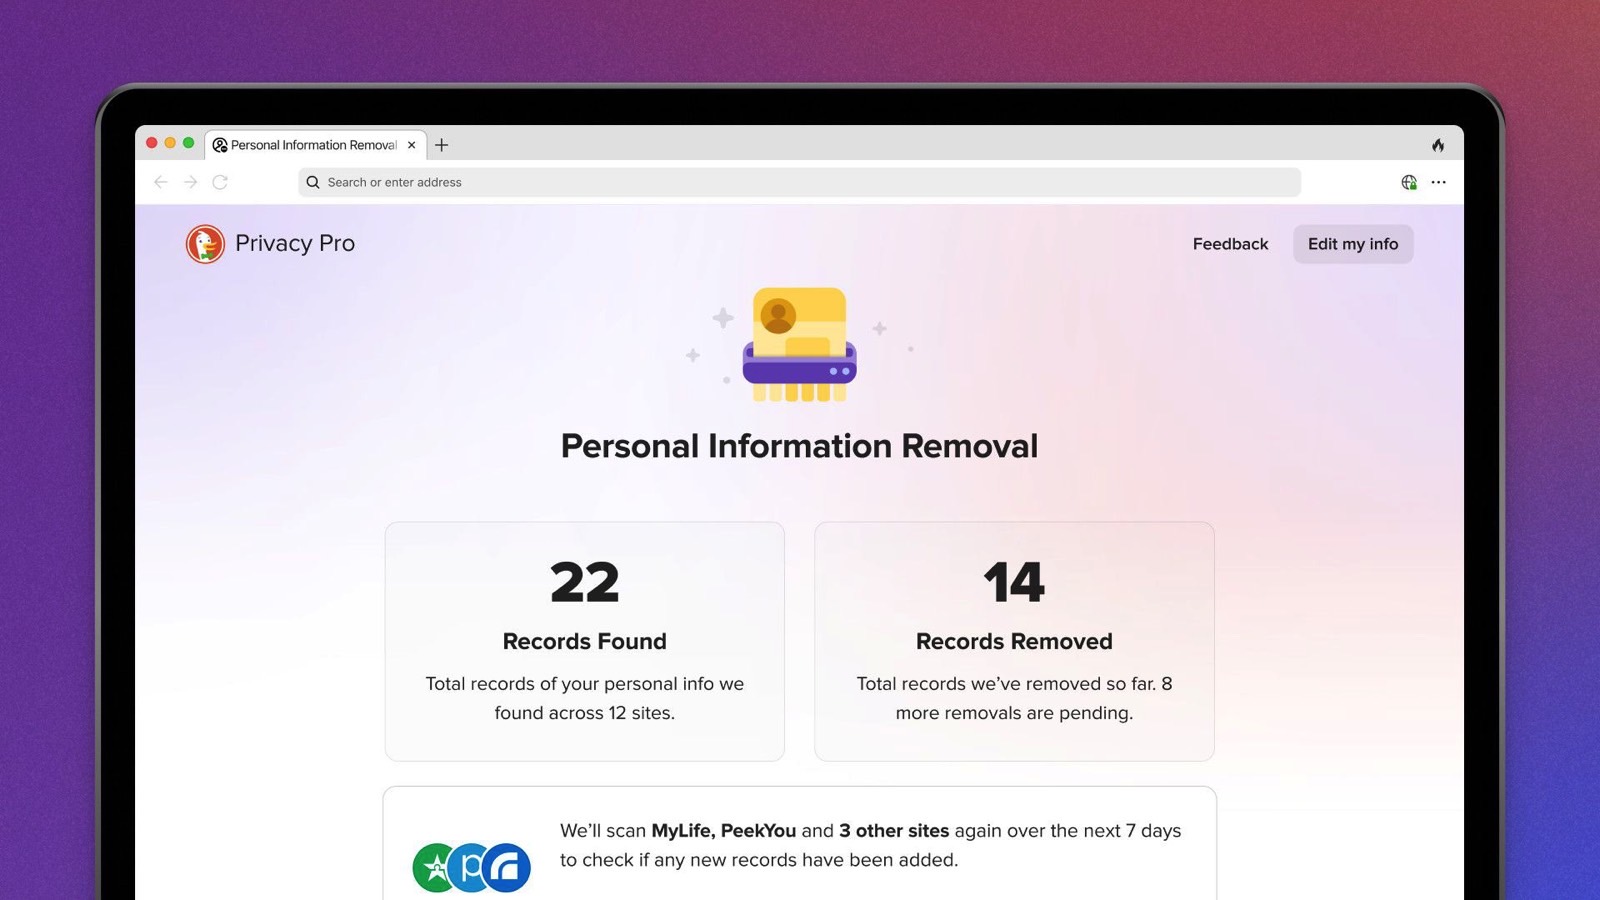 DuckDuckGo Privacy Pro: The Personal Information Removal tool.